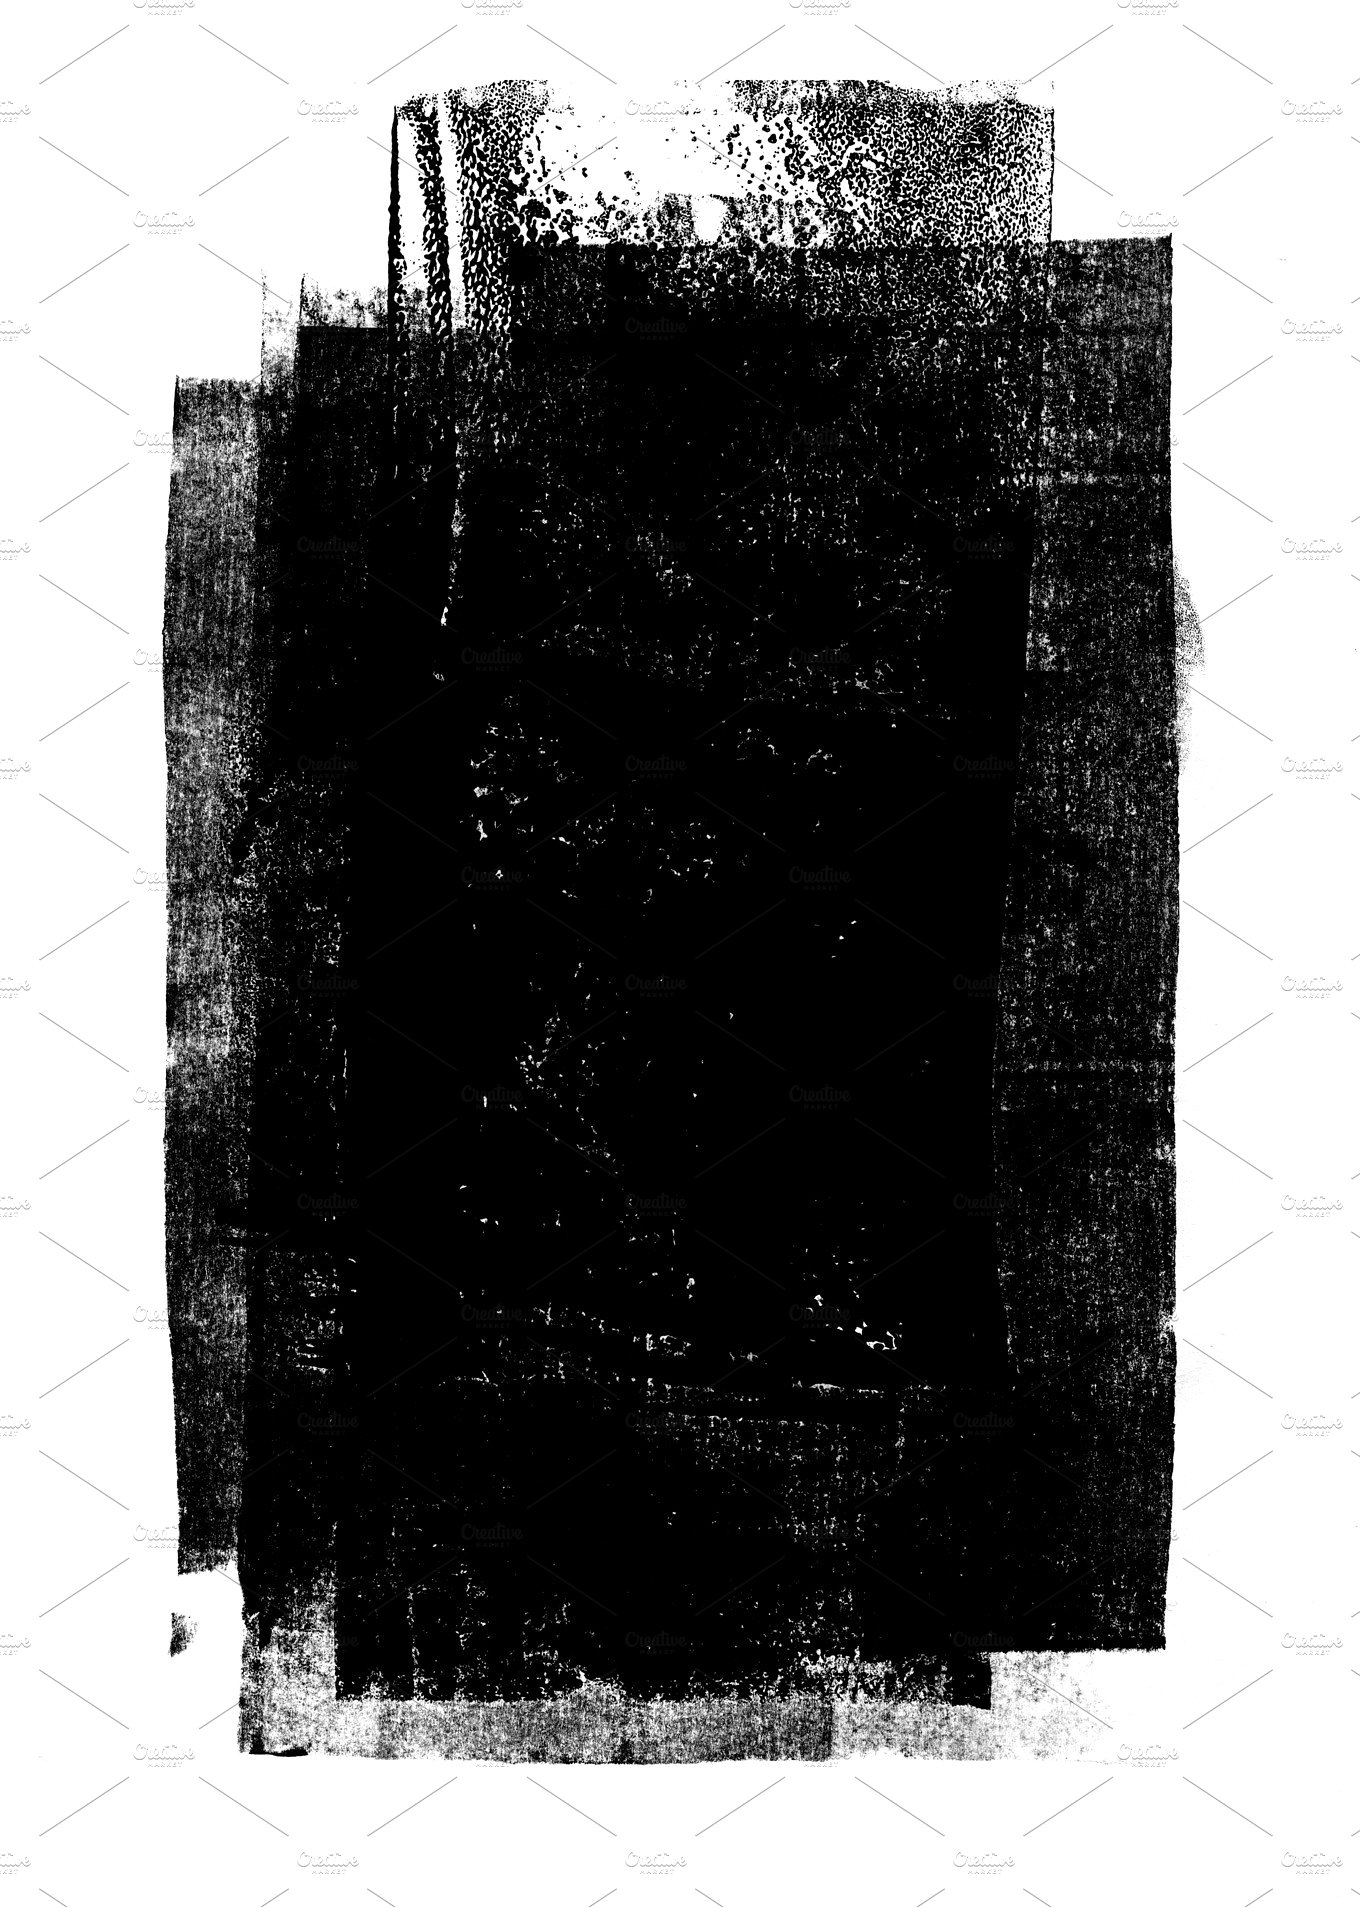 Black rolled ink texture ~ Abstract Photos ~ Creative Market